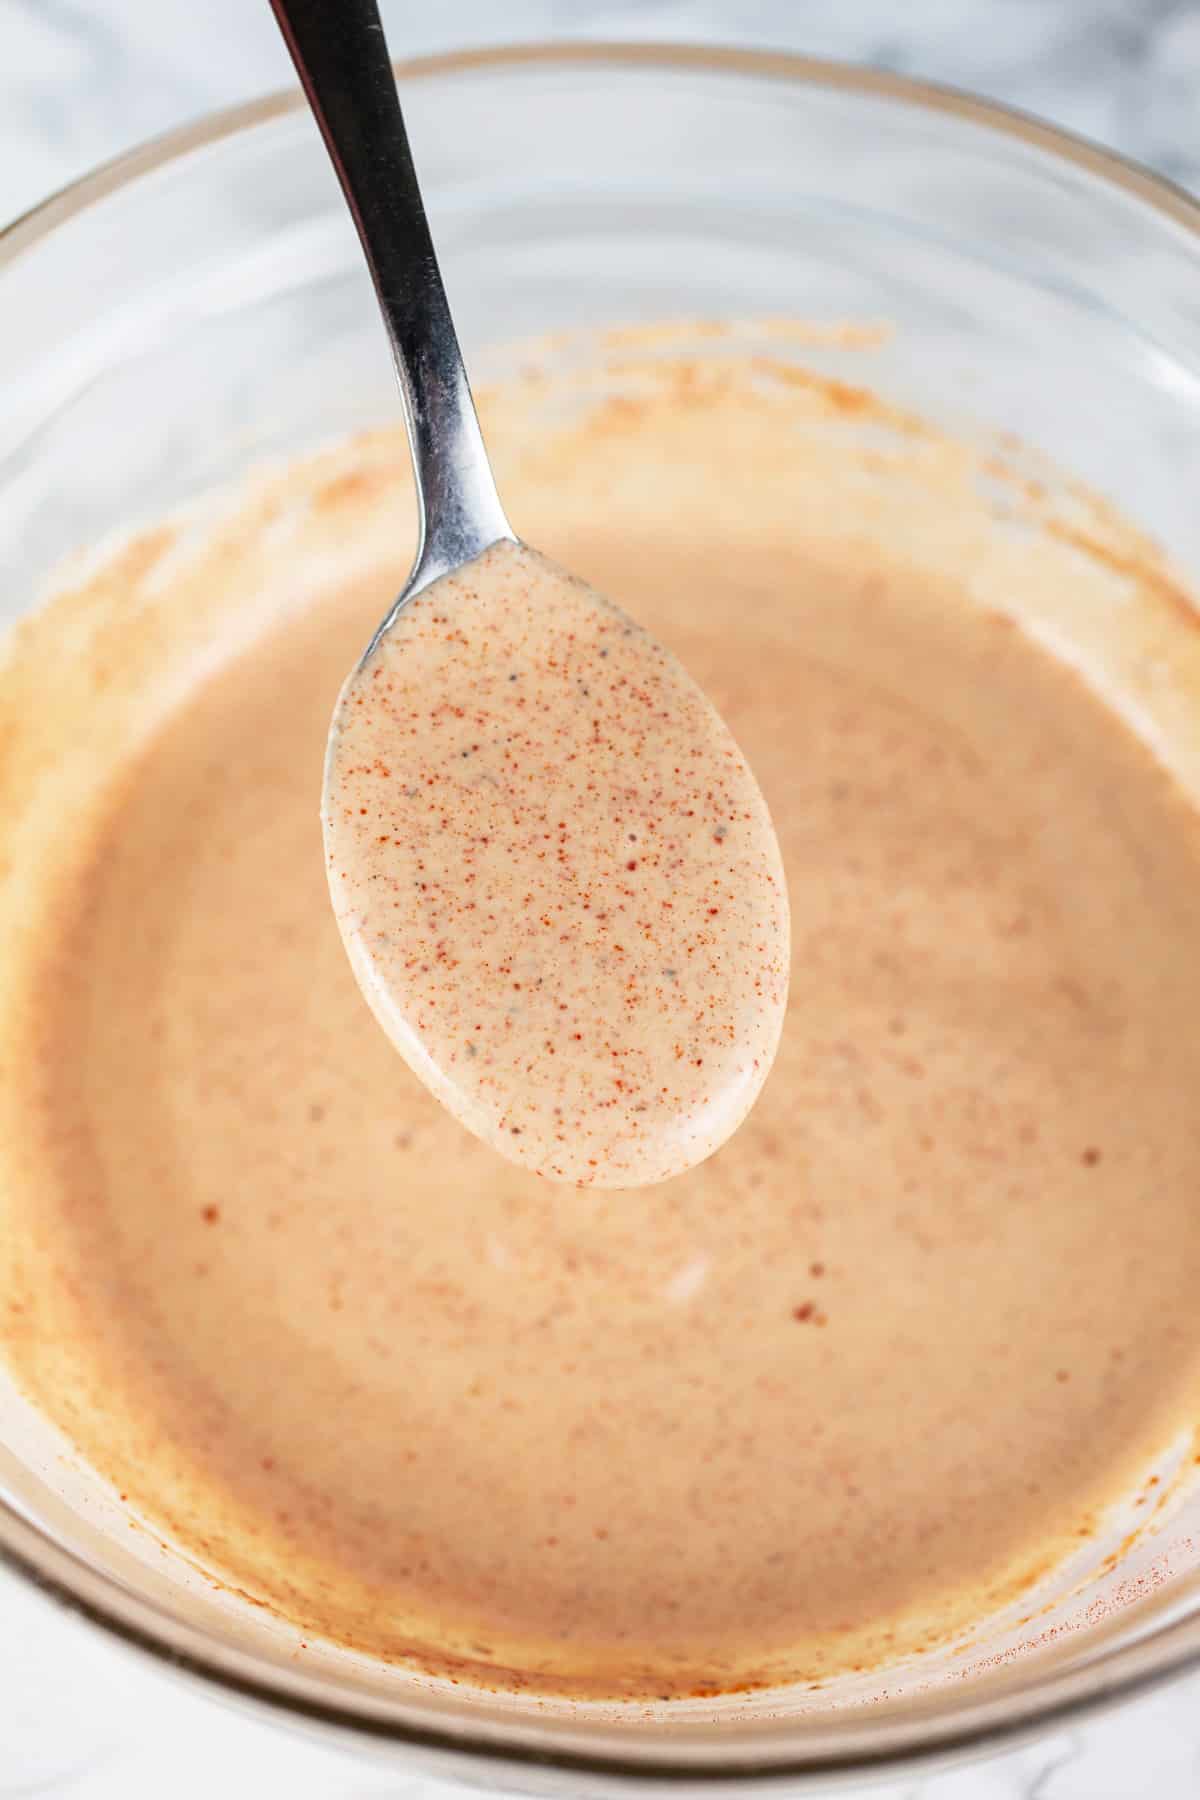 Spoonful of smoked paprika mayo dressing lifted from small glass bowl.